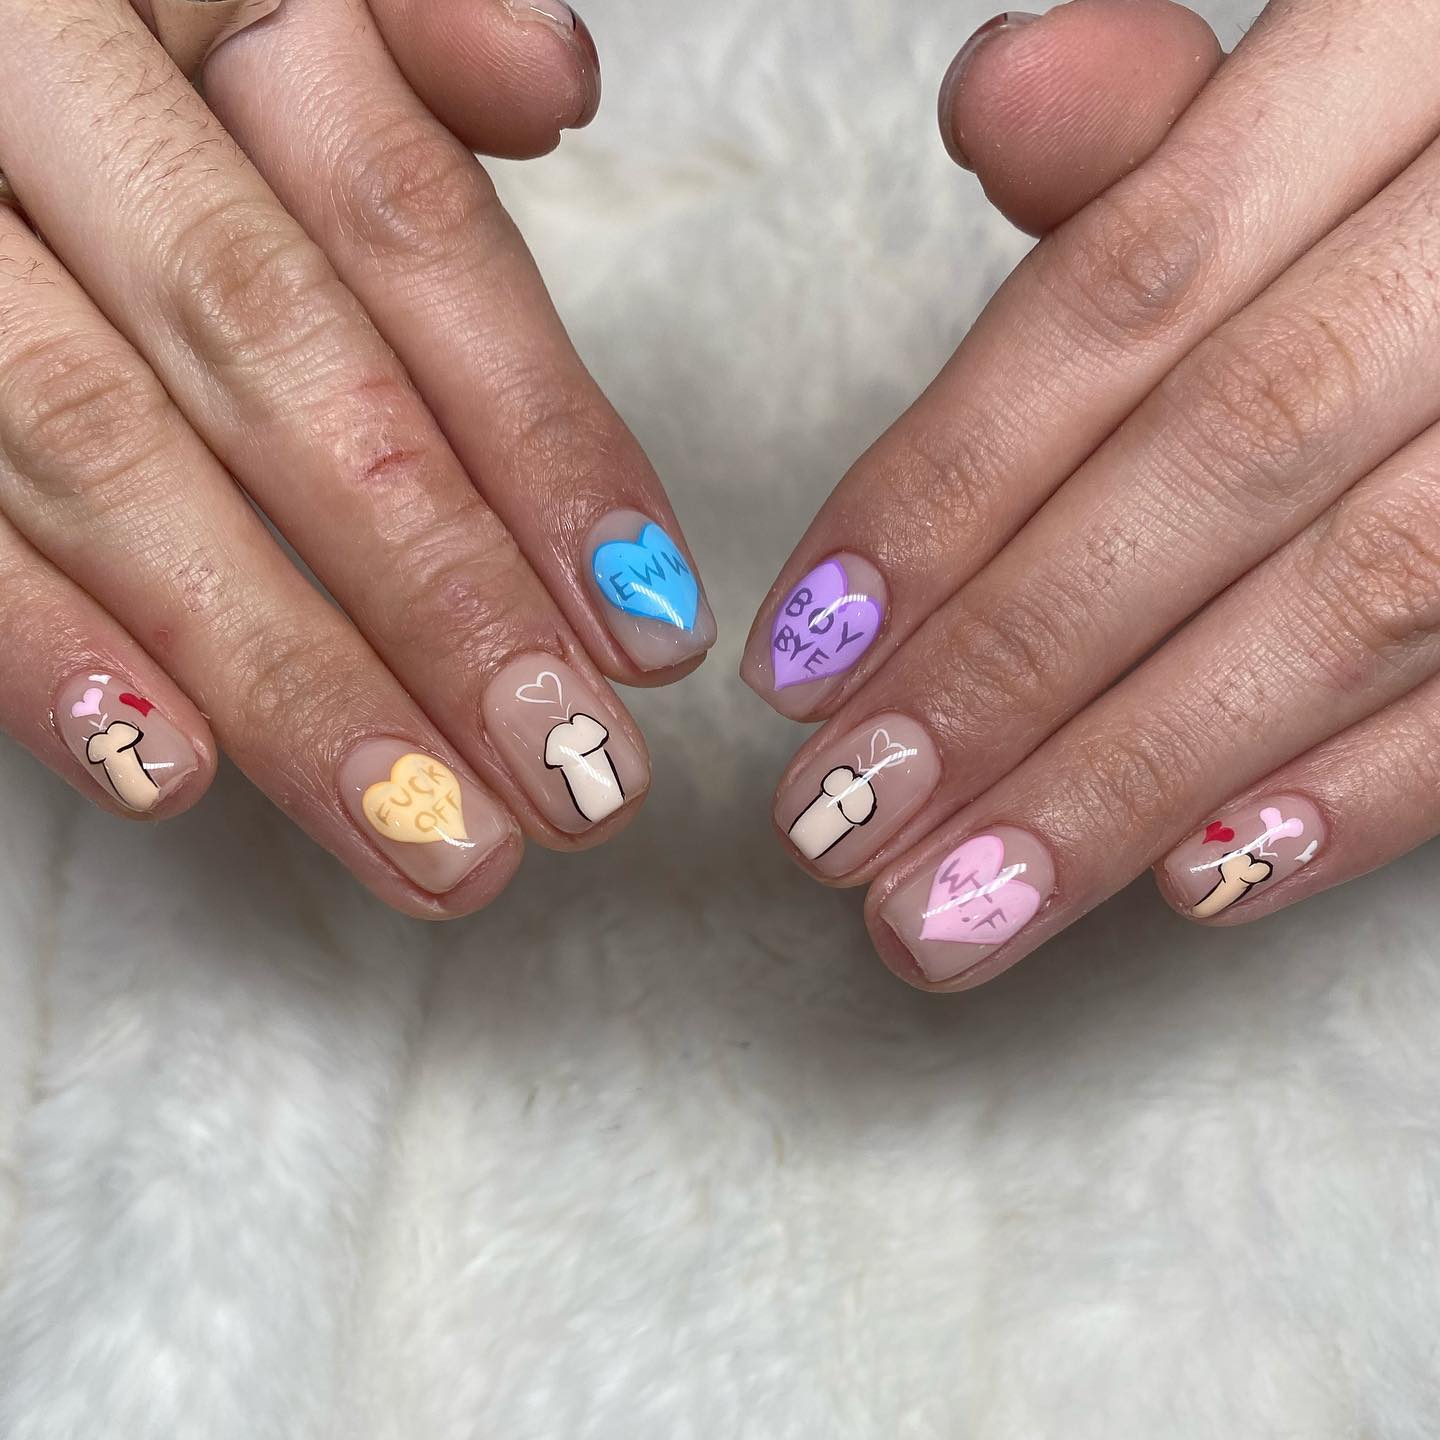 Your Valentine's Day will be full of joy with these nails. All you need is some colorful hearts that you can write something on and penises spouting hearts.